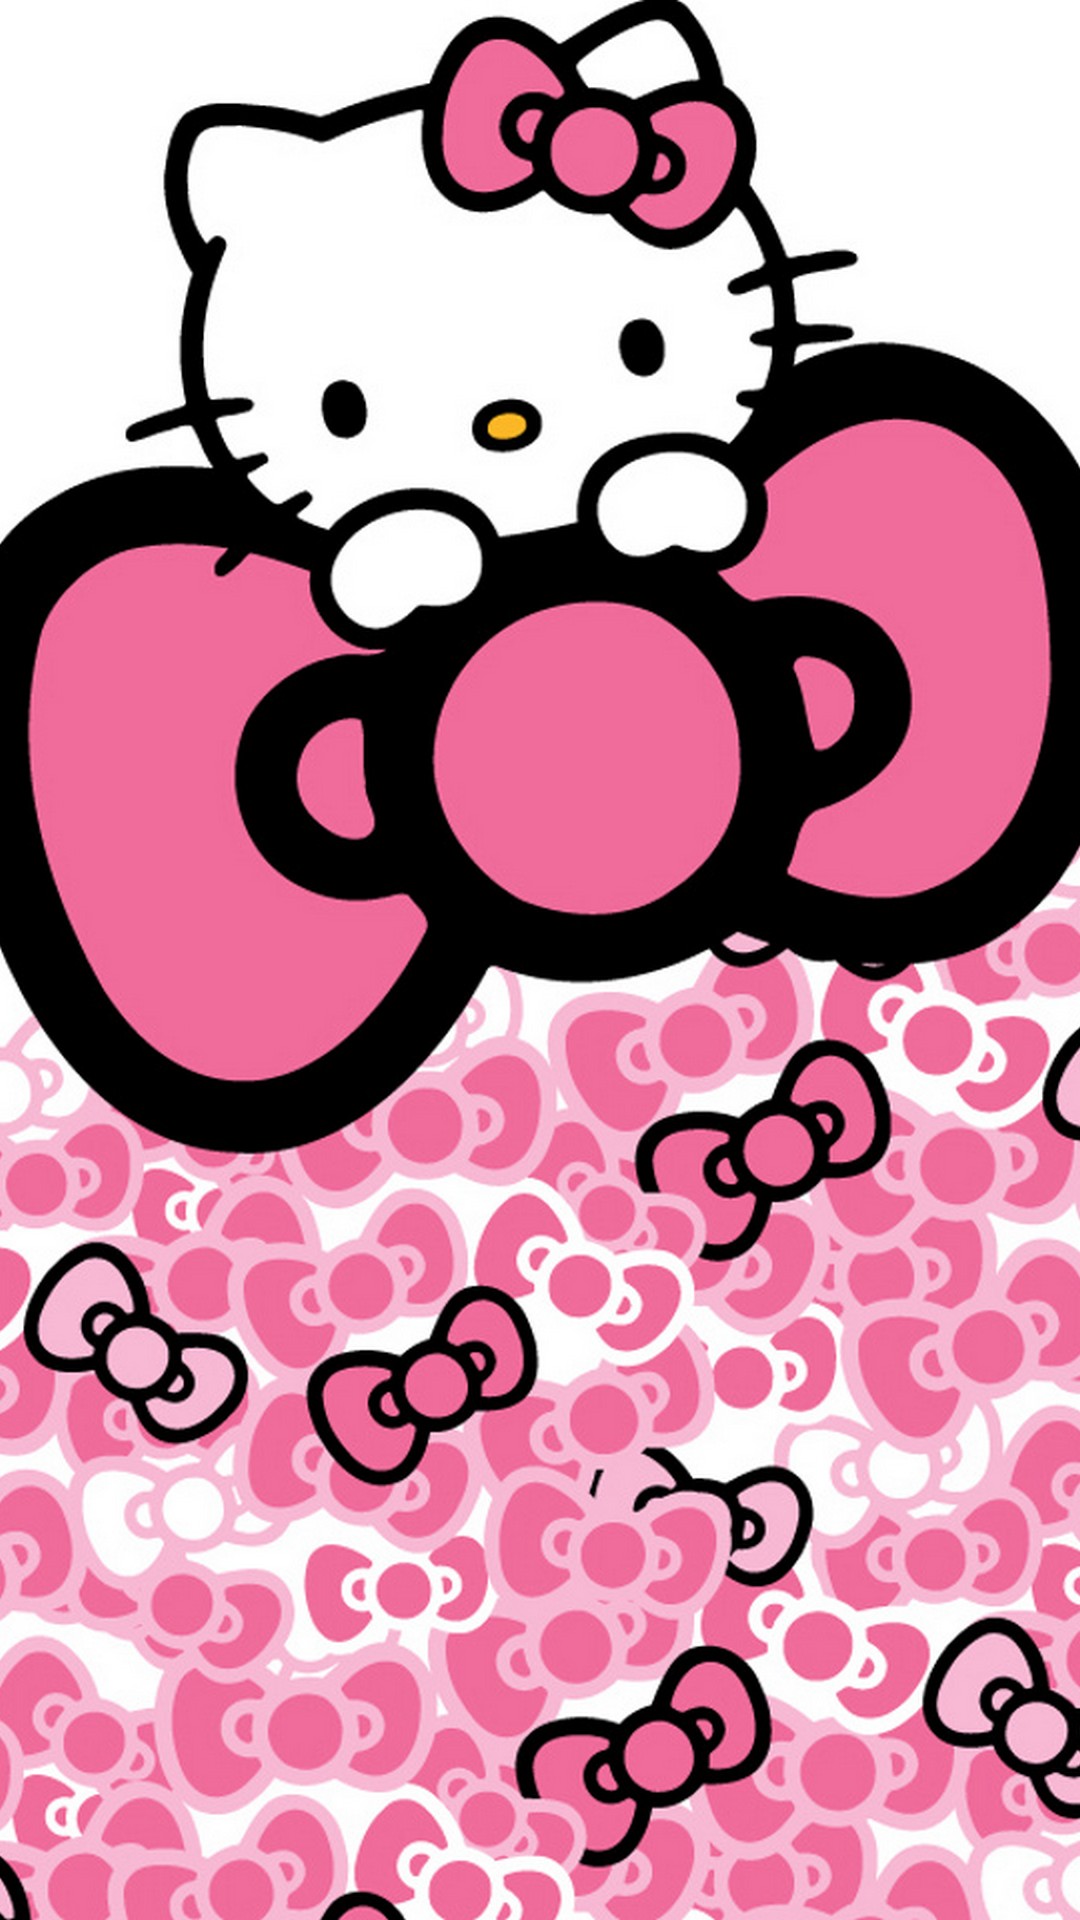 Hello Kitty Pictures Wallpaper For Android with image resolution 1080x1920 pixel. You can make this wallpaper for your Android backgrounds, Tablet, Smartphones Screensavers and Mobile Phone Lock Screen